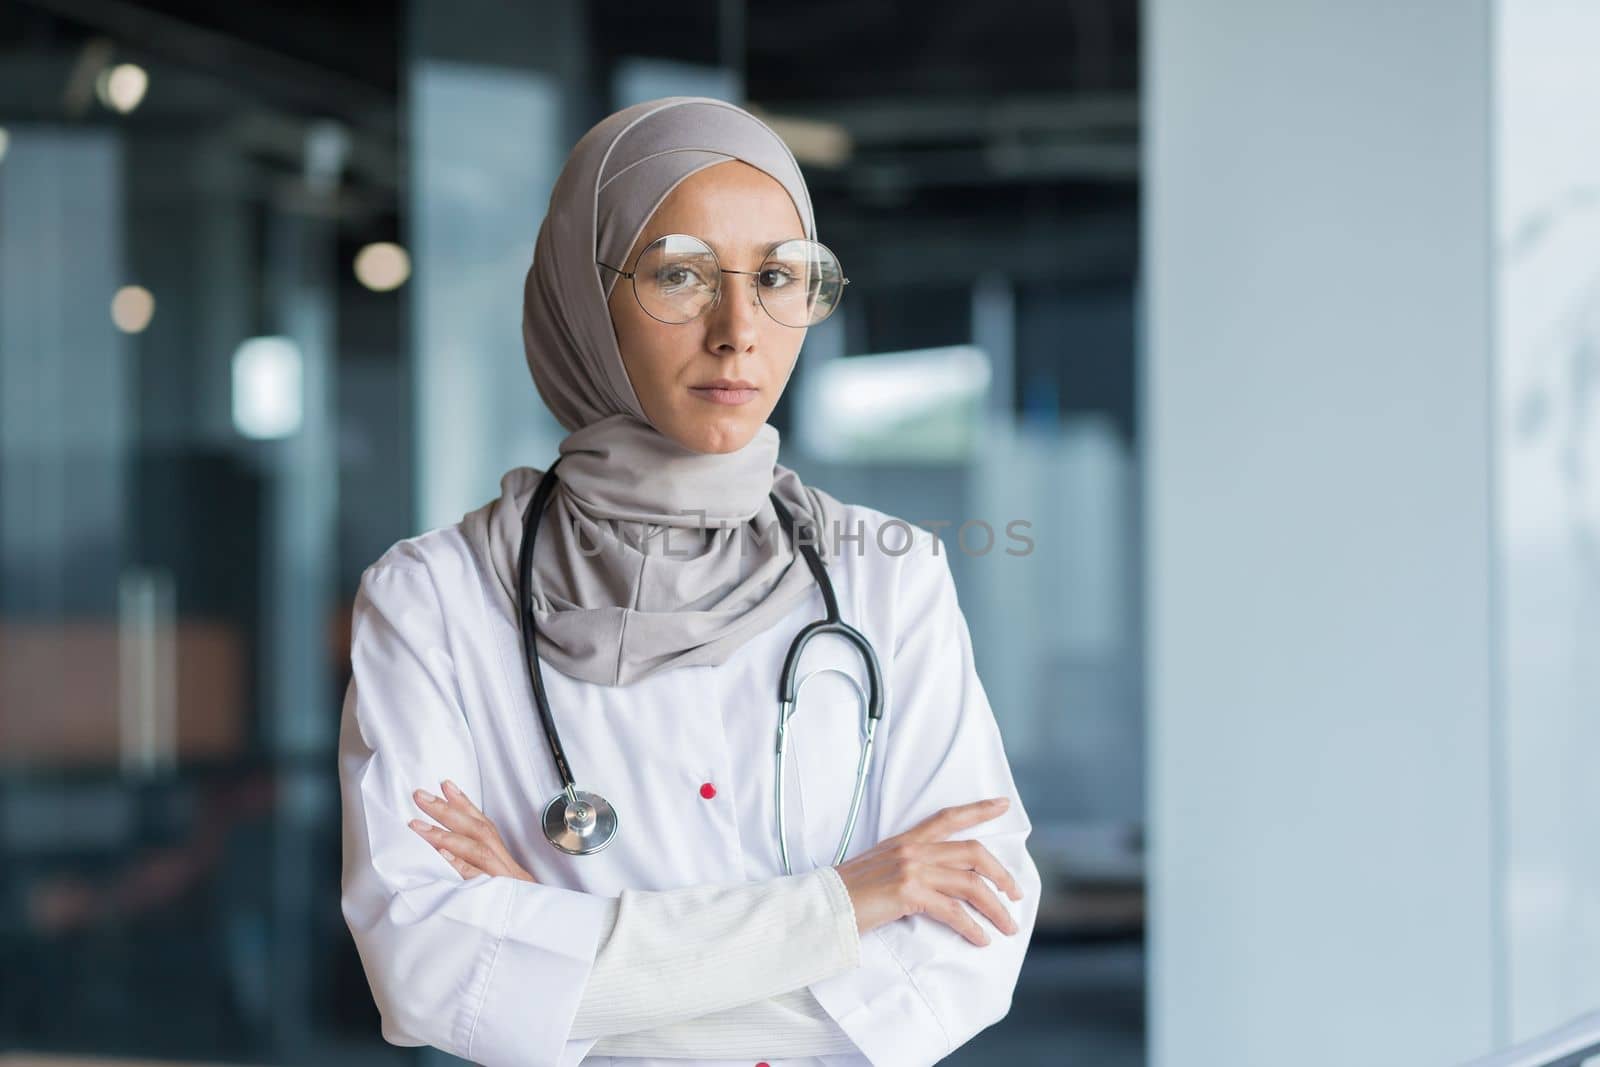 Portrait of a young Muslim woman doctor. She is standing in the hall of the hospital dressed in a hijab, wearing glasses and a stethoscope, looking seriously into the camera, her arms crossed.